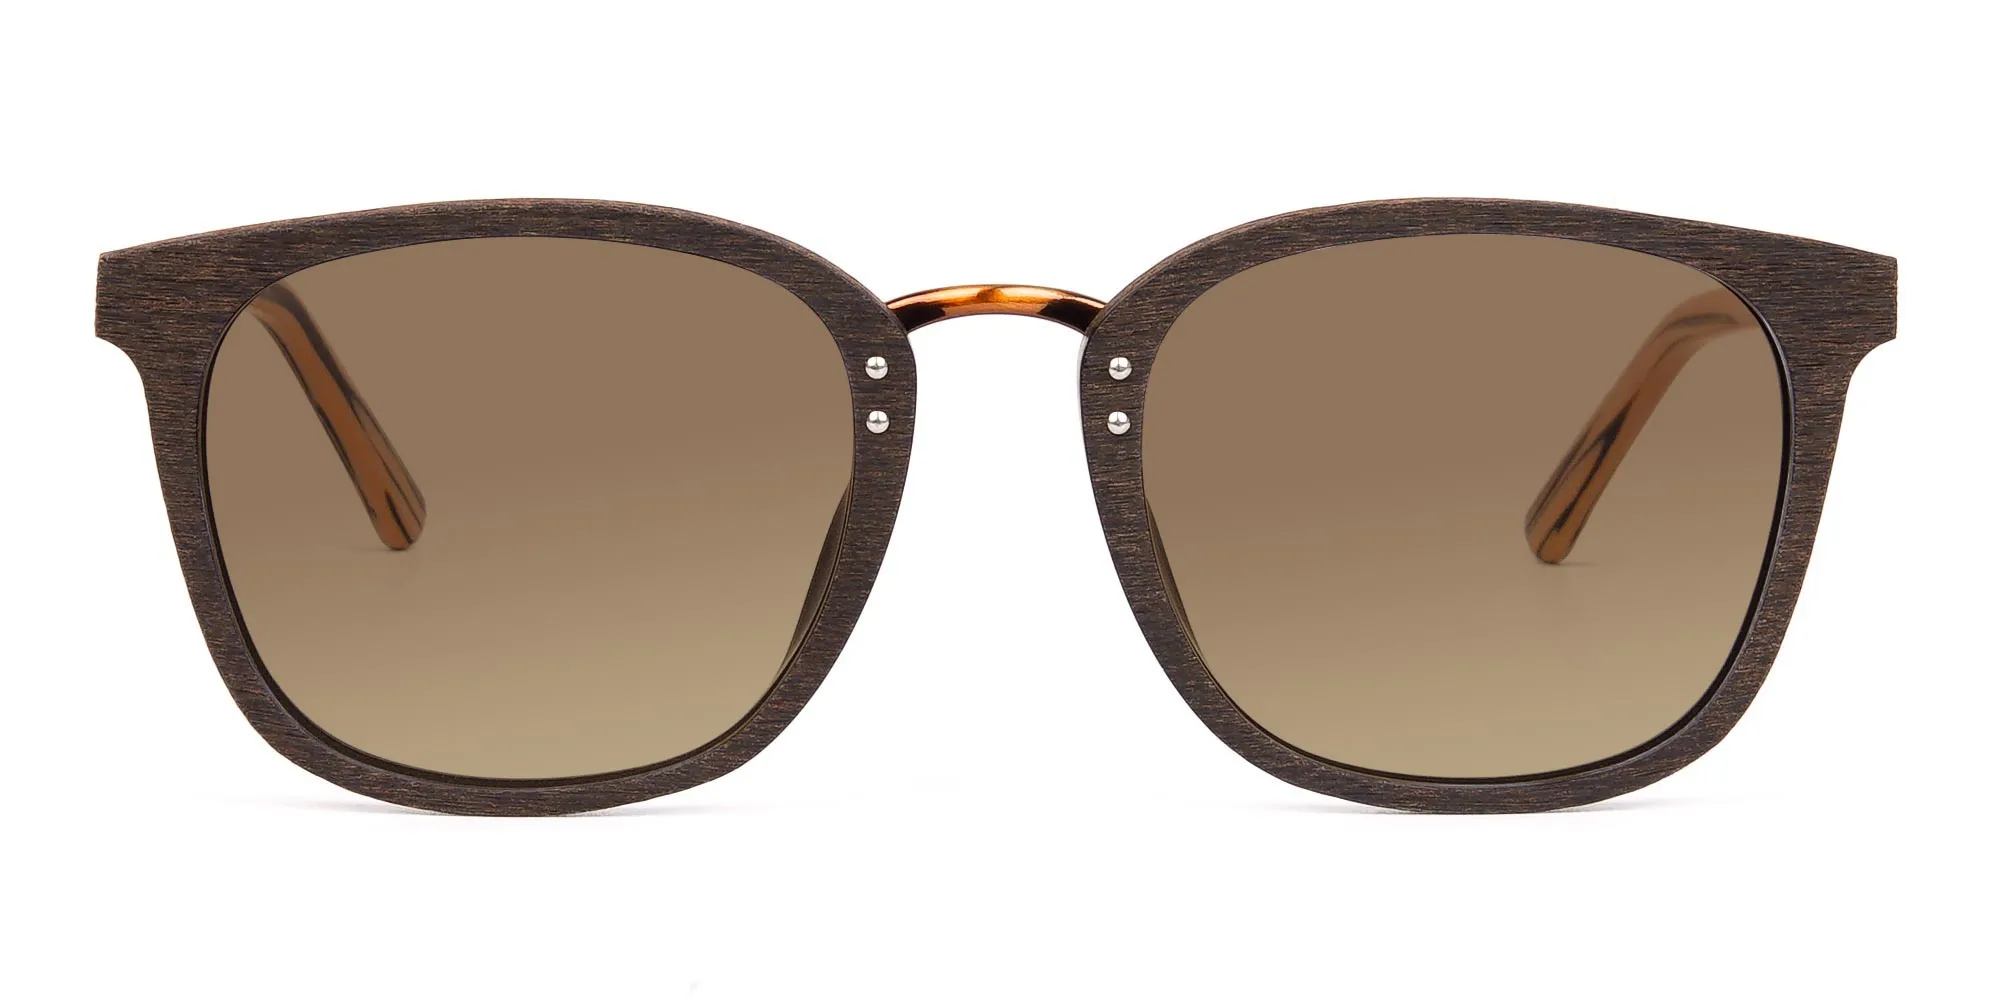 MIDDLEWOOD 62-S - Wooden Brown Square Sunglasses with Brown Tint ...